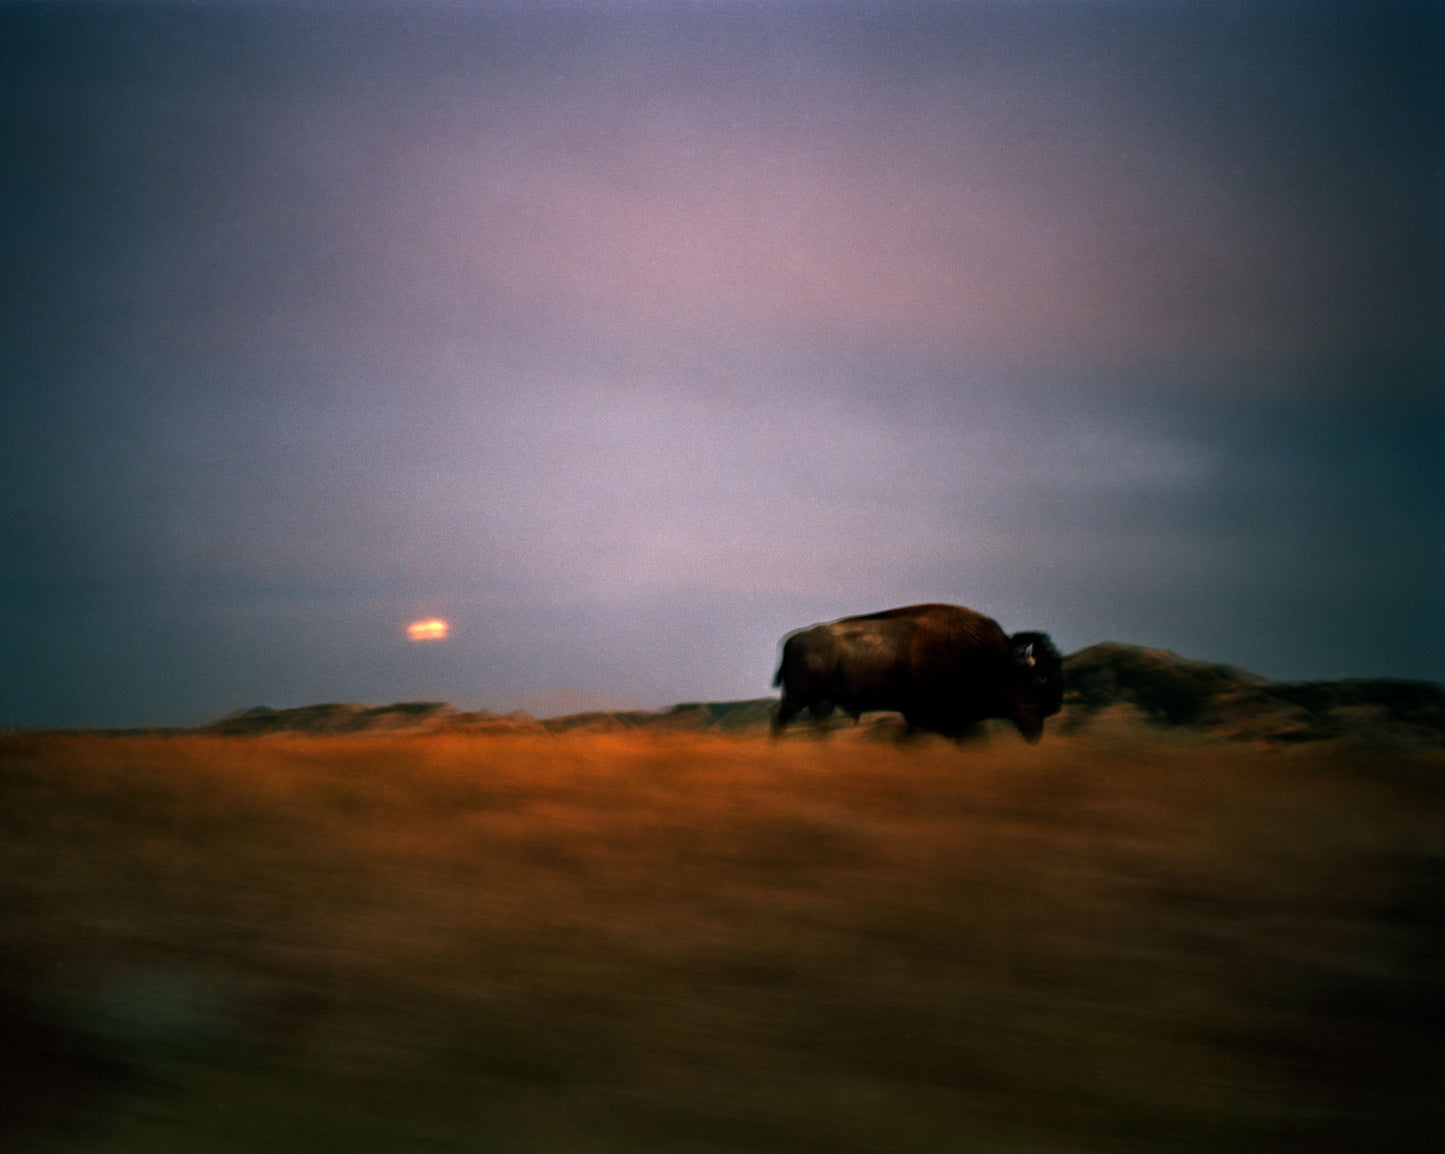 Bison with Moon Rise